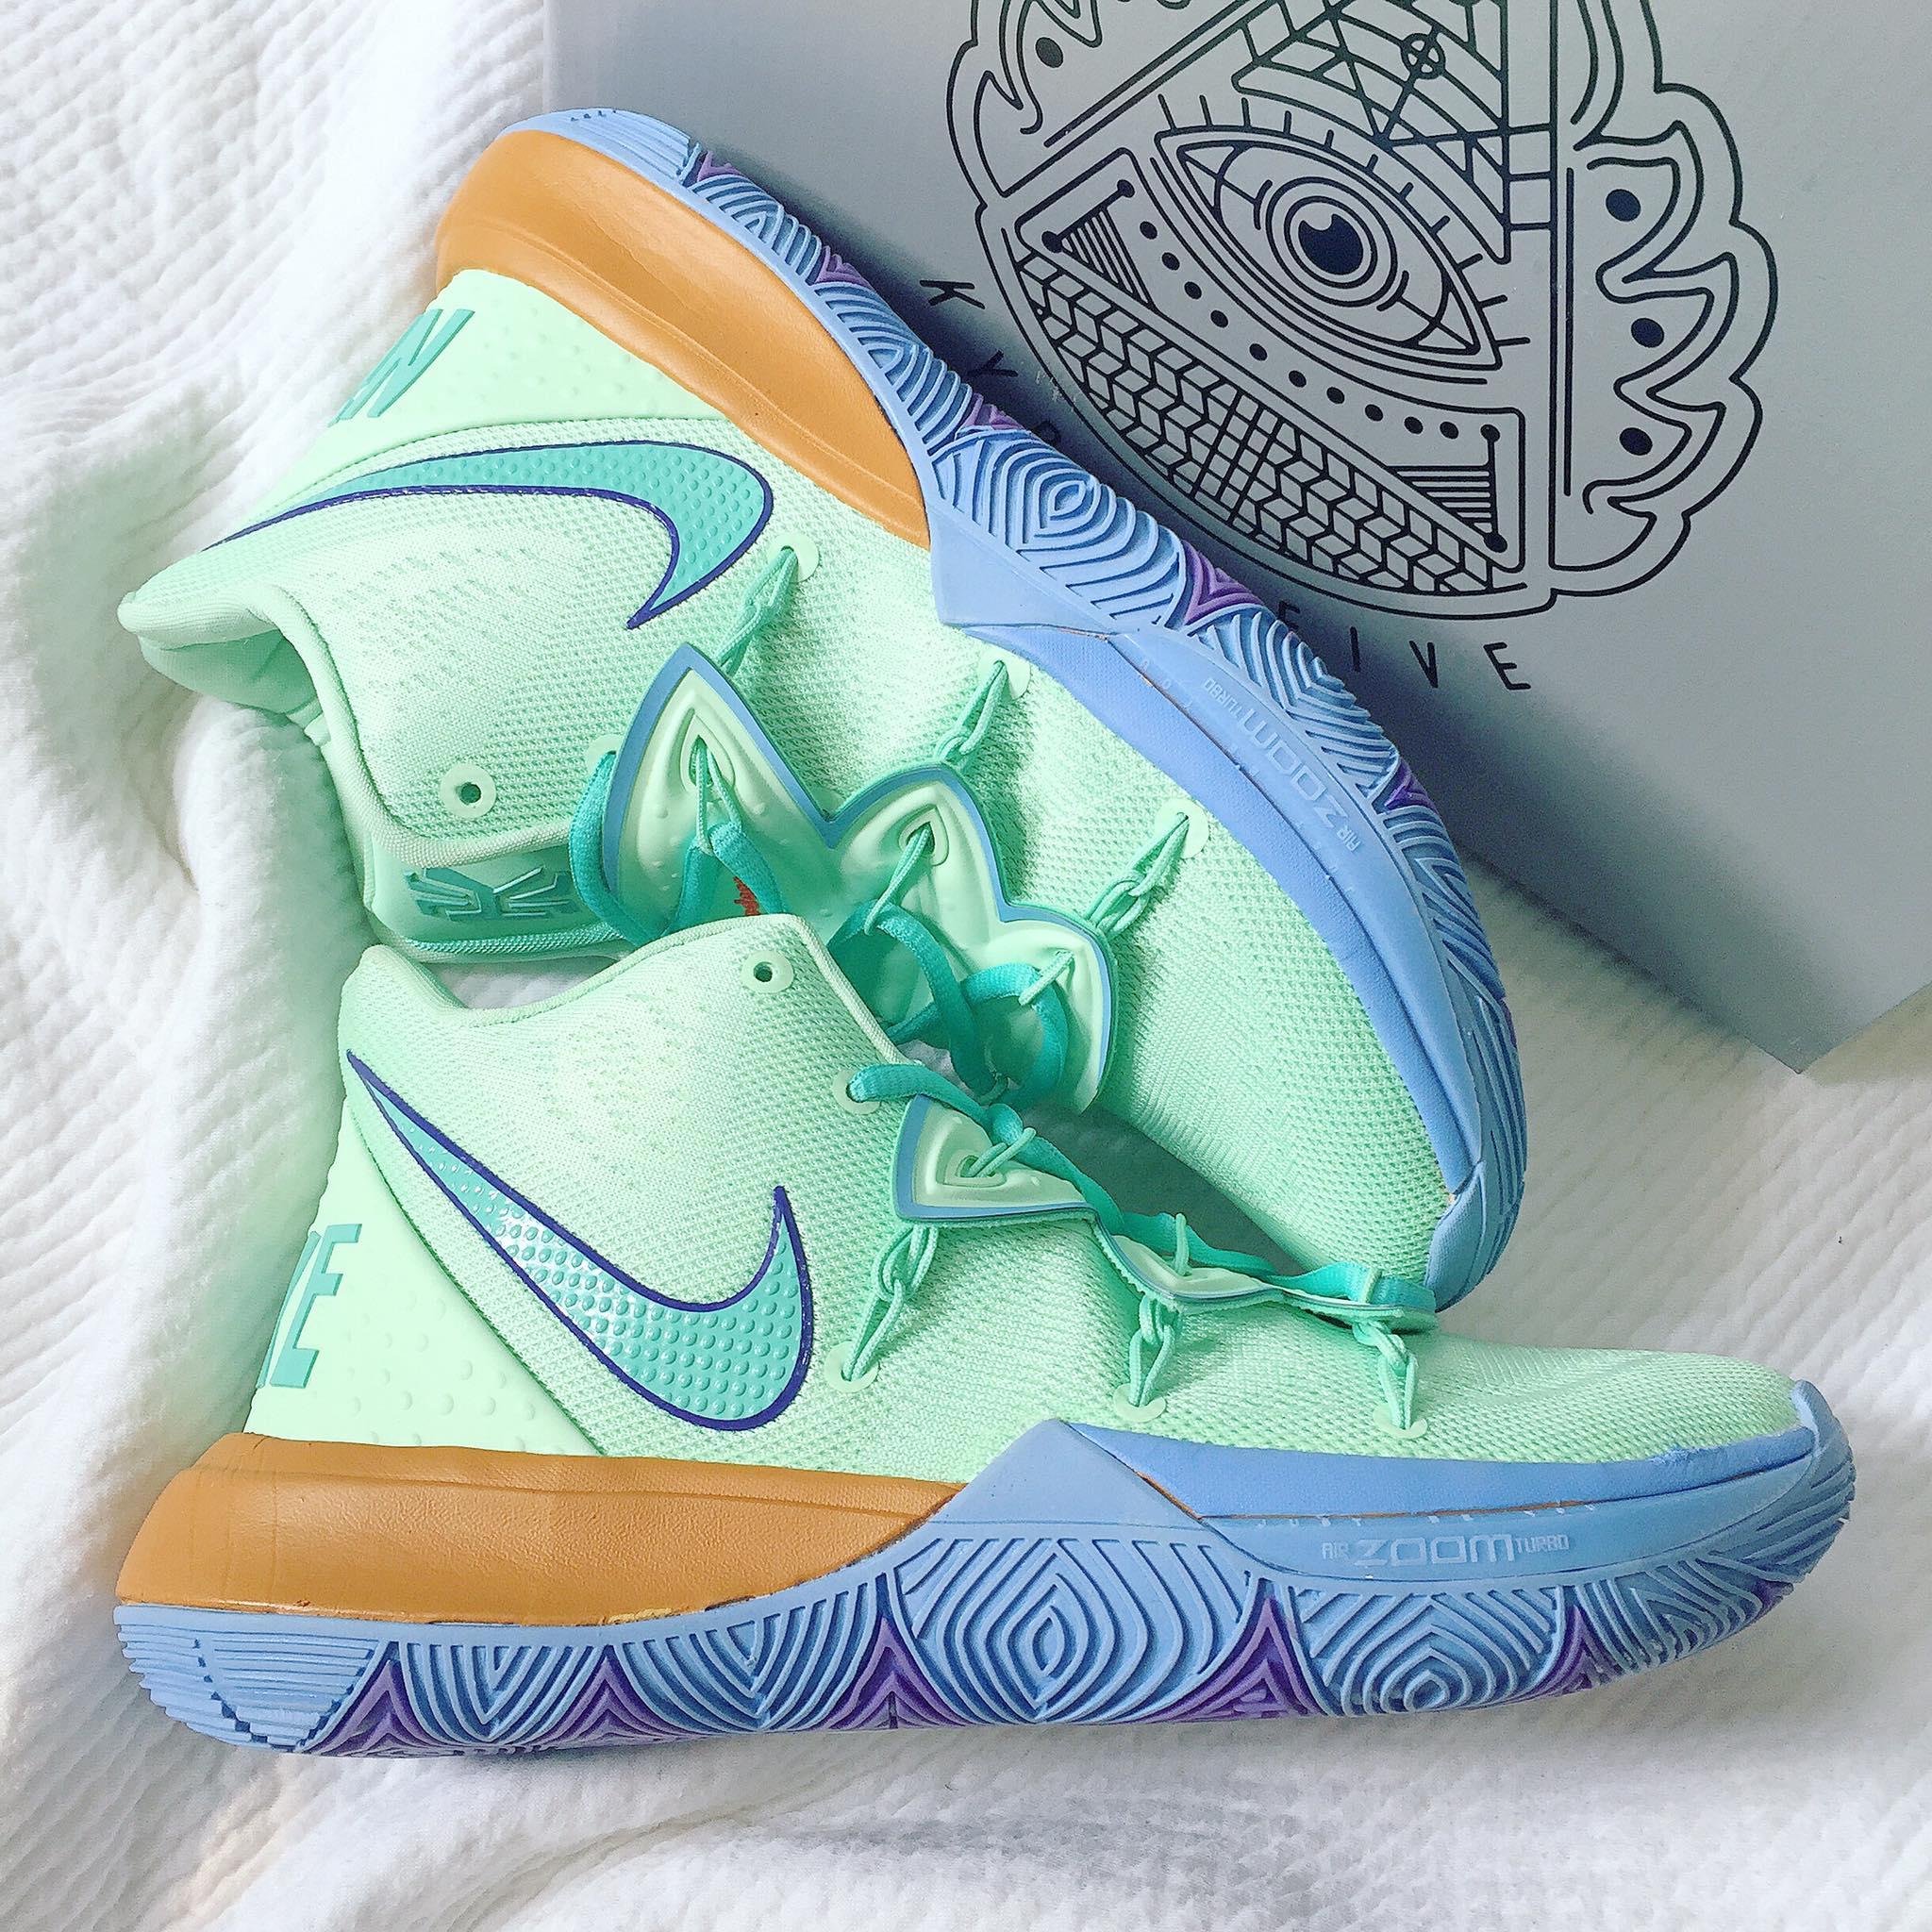 kyrie 5 squidward shoes